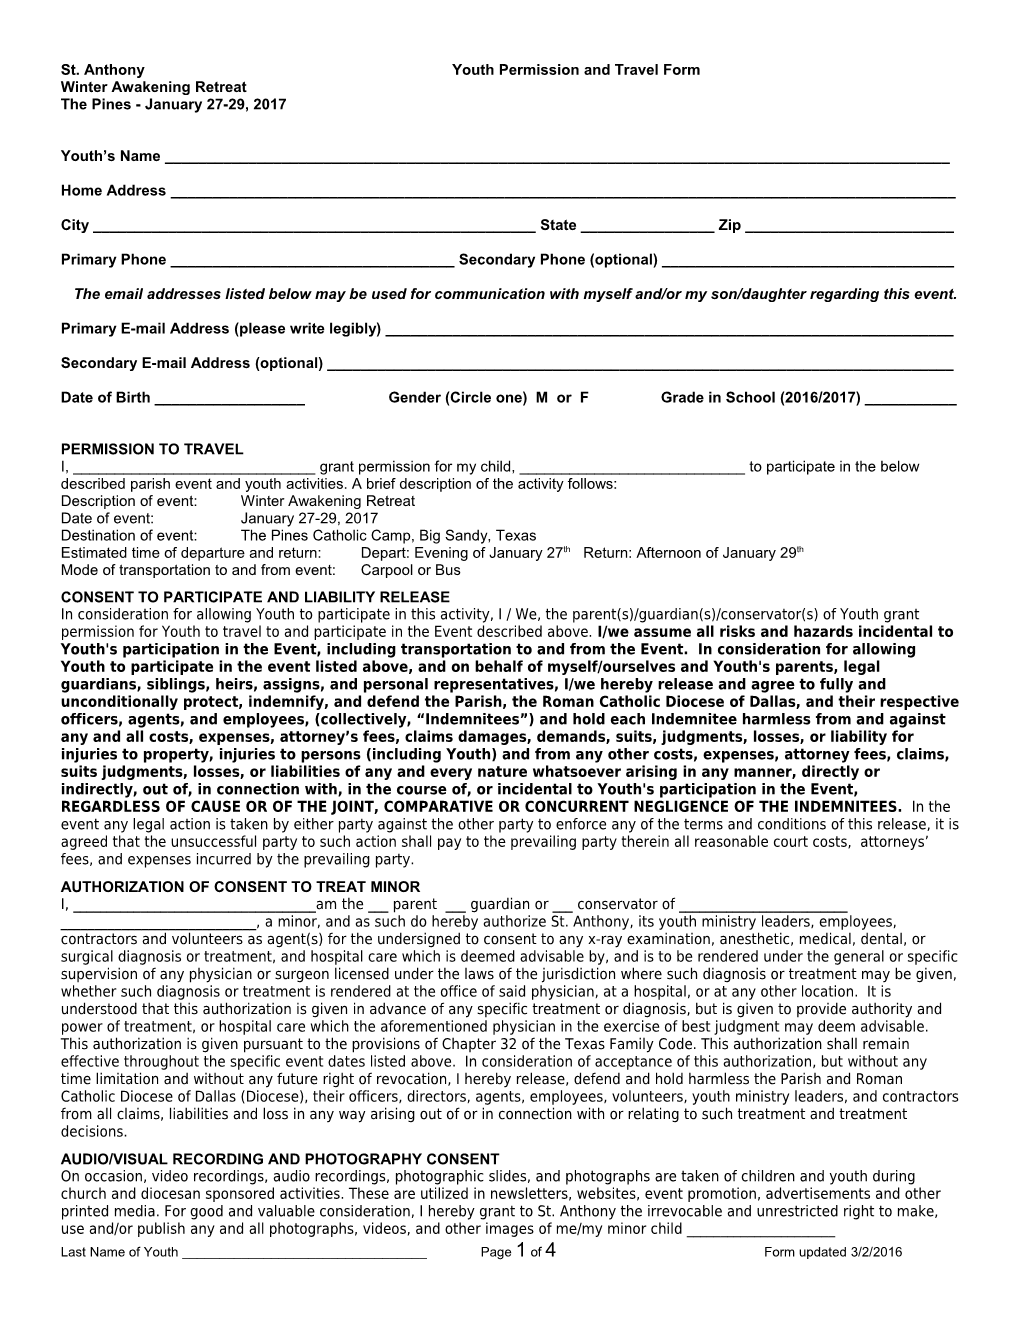 St. Anthony Youth Permission and Travel Form